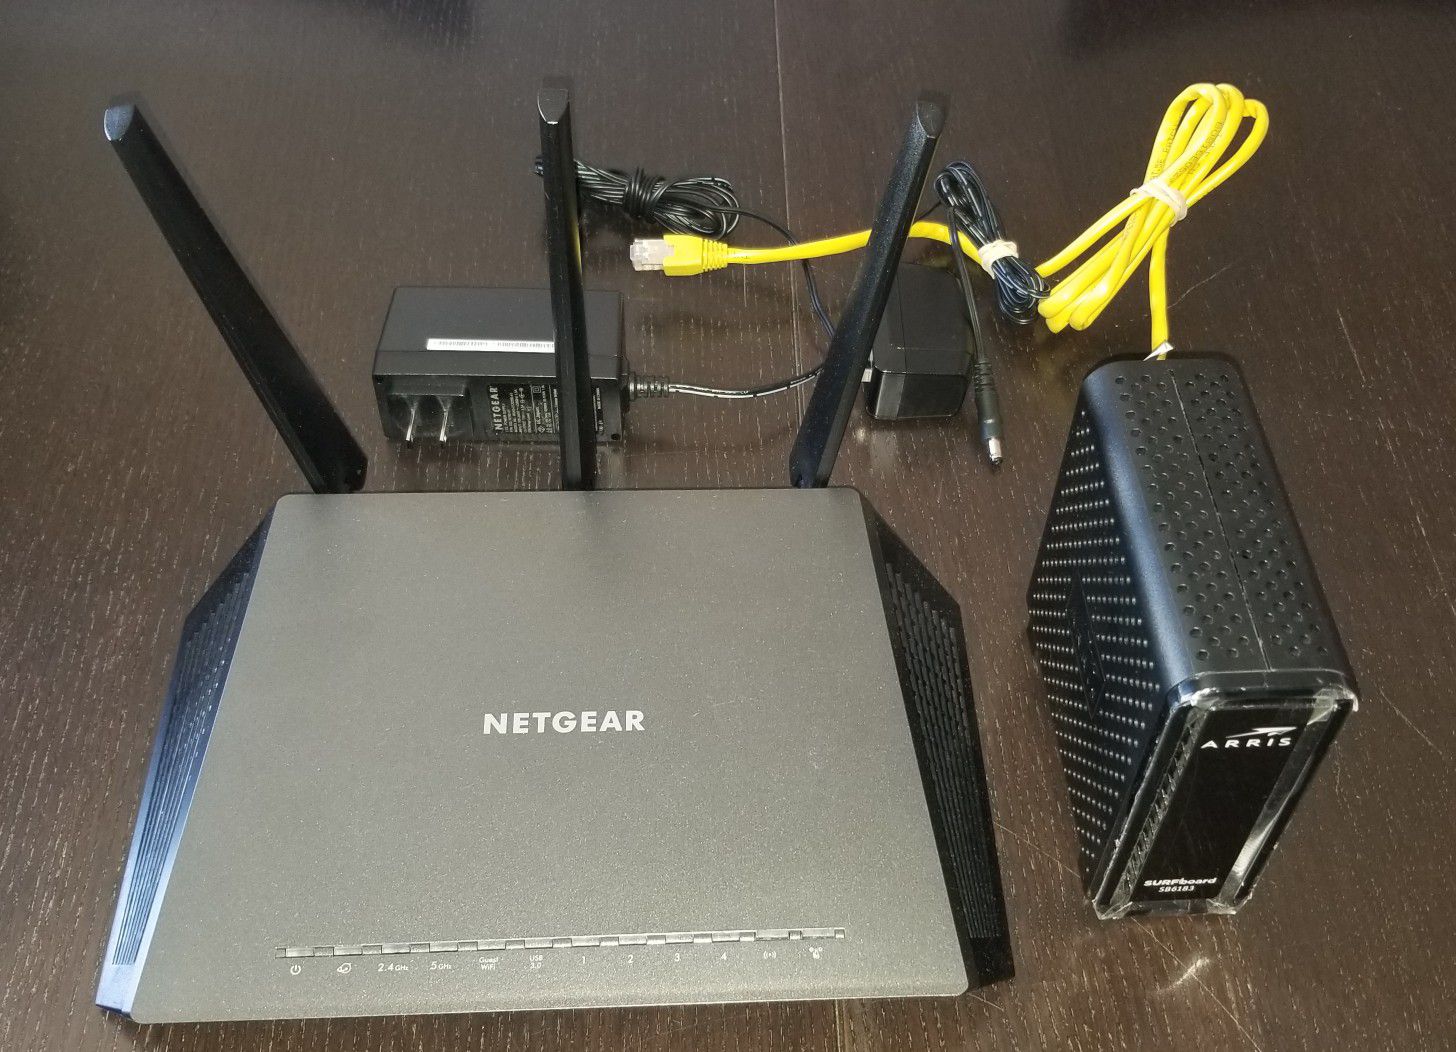 Netgear router and ARRIS Cable modem for Spectrum/Charter